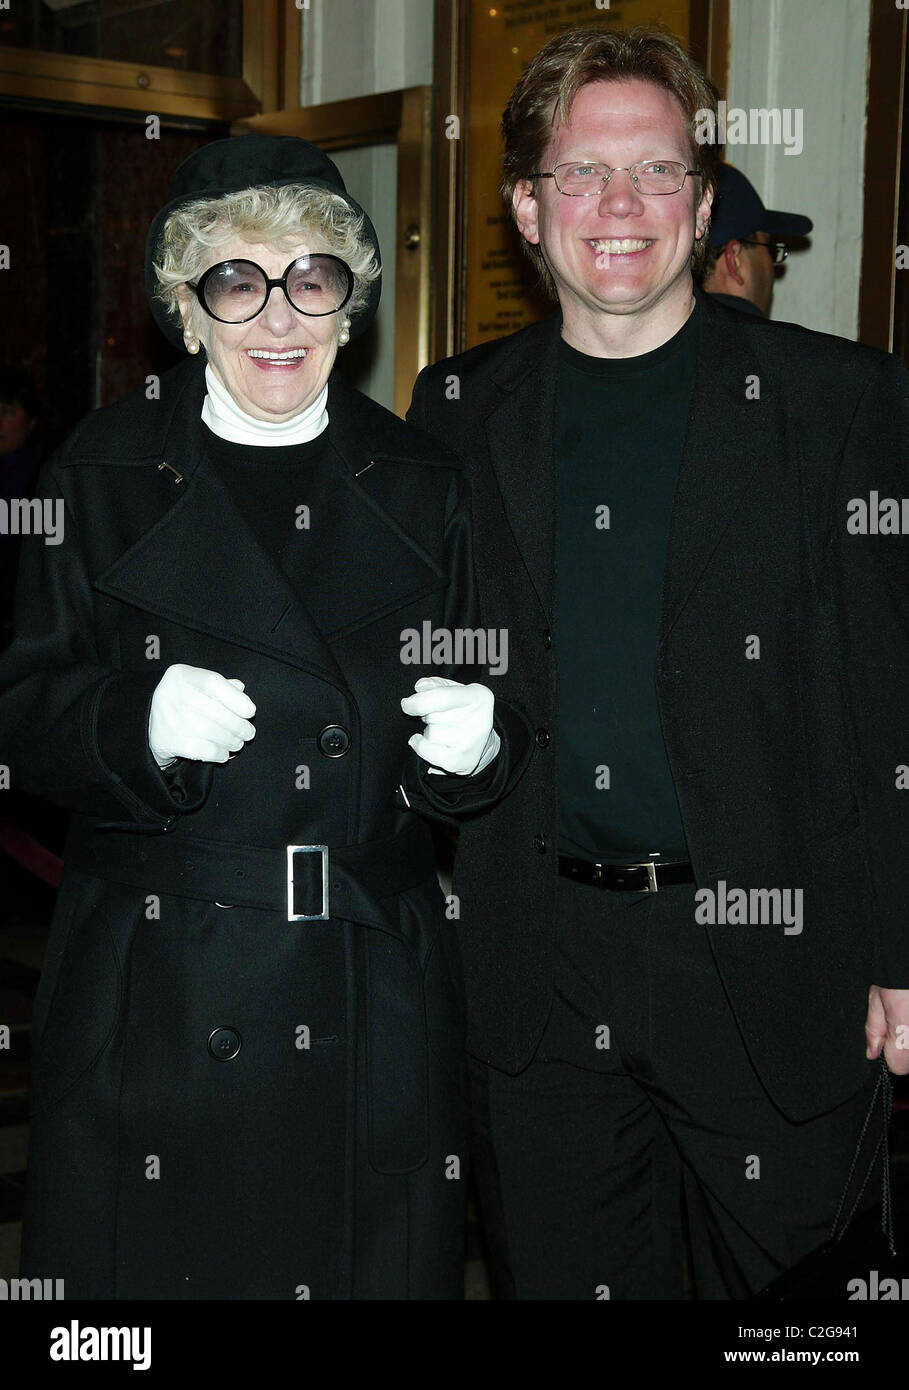 Elaine Stritch Opening night performance of 'August: Osage County' at the Imperial Theatre - Arrivals New York City, USA - Stock Photo